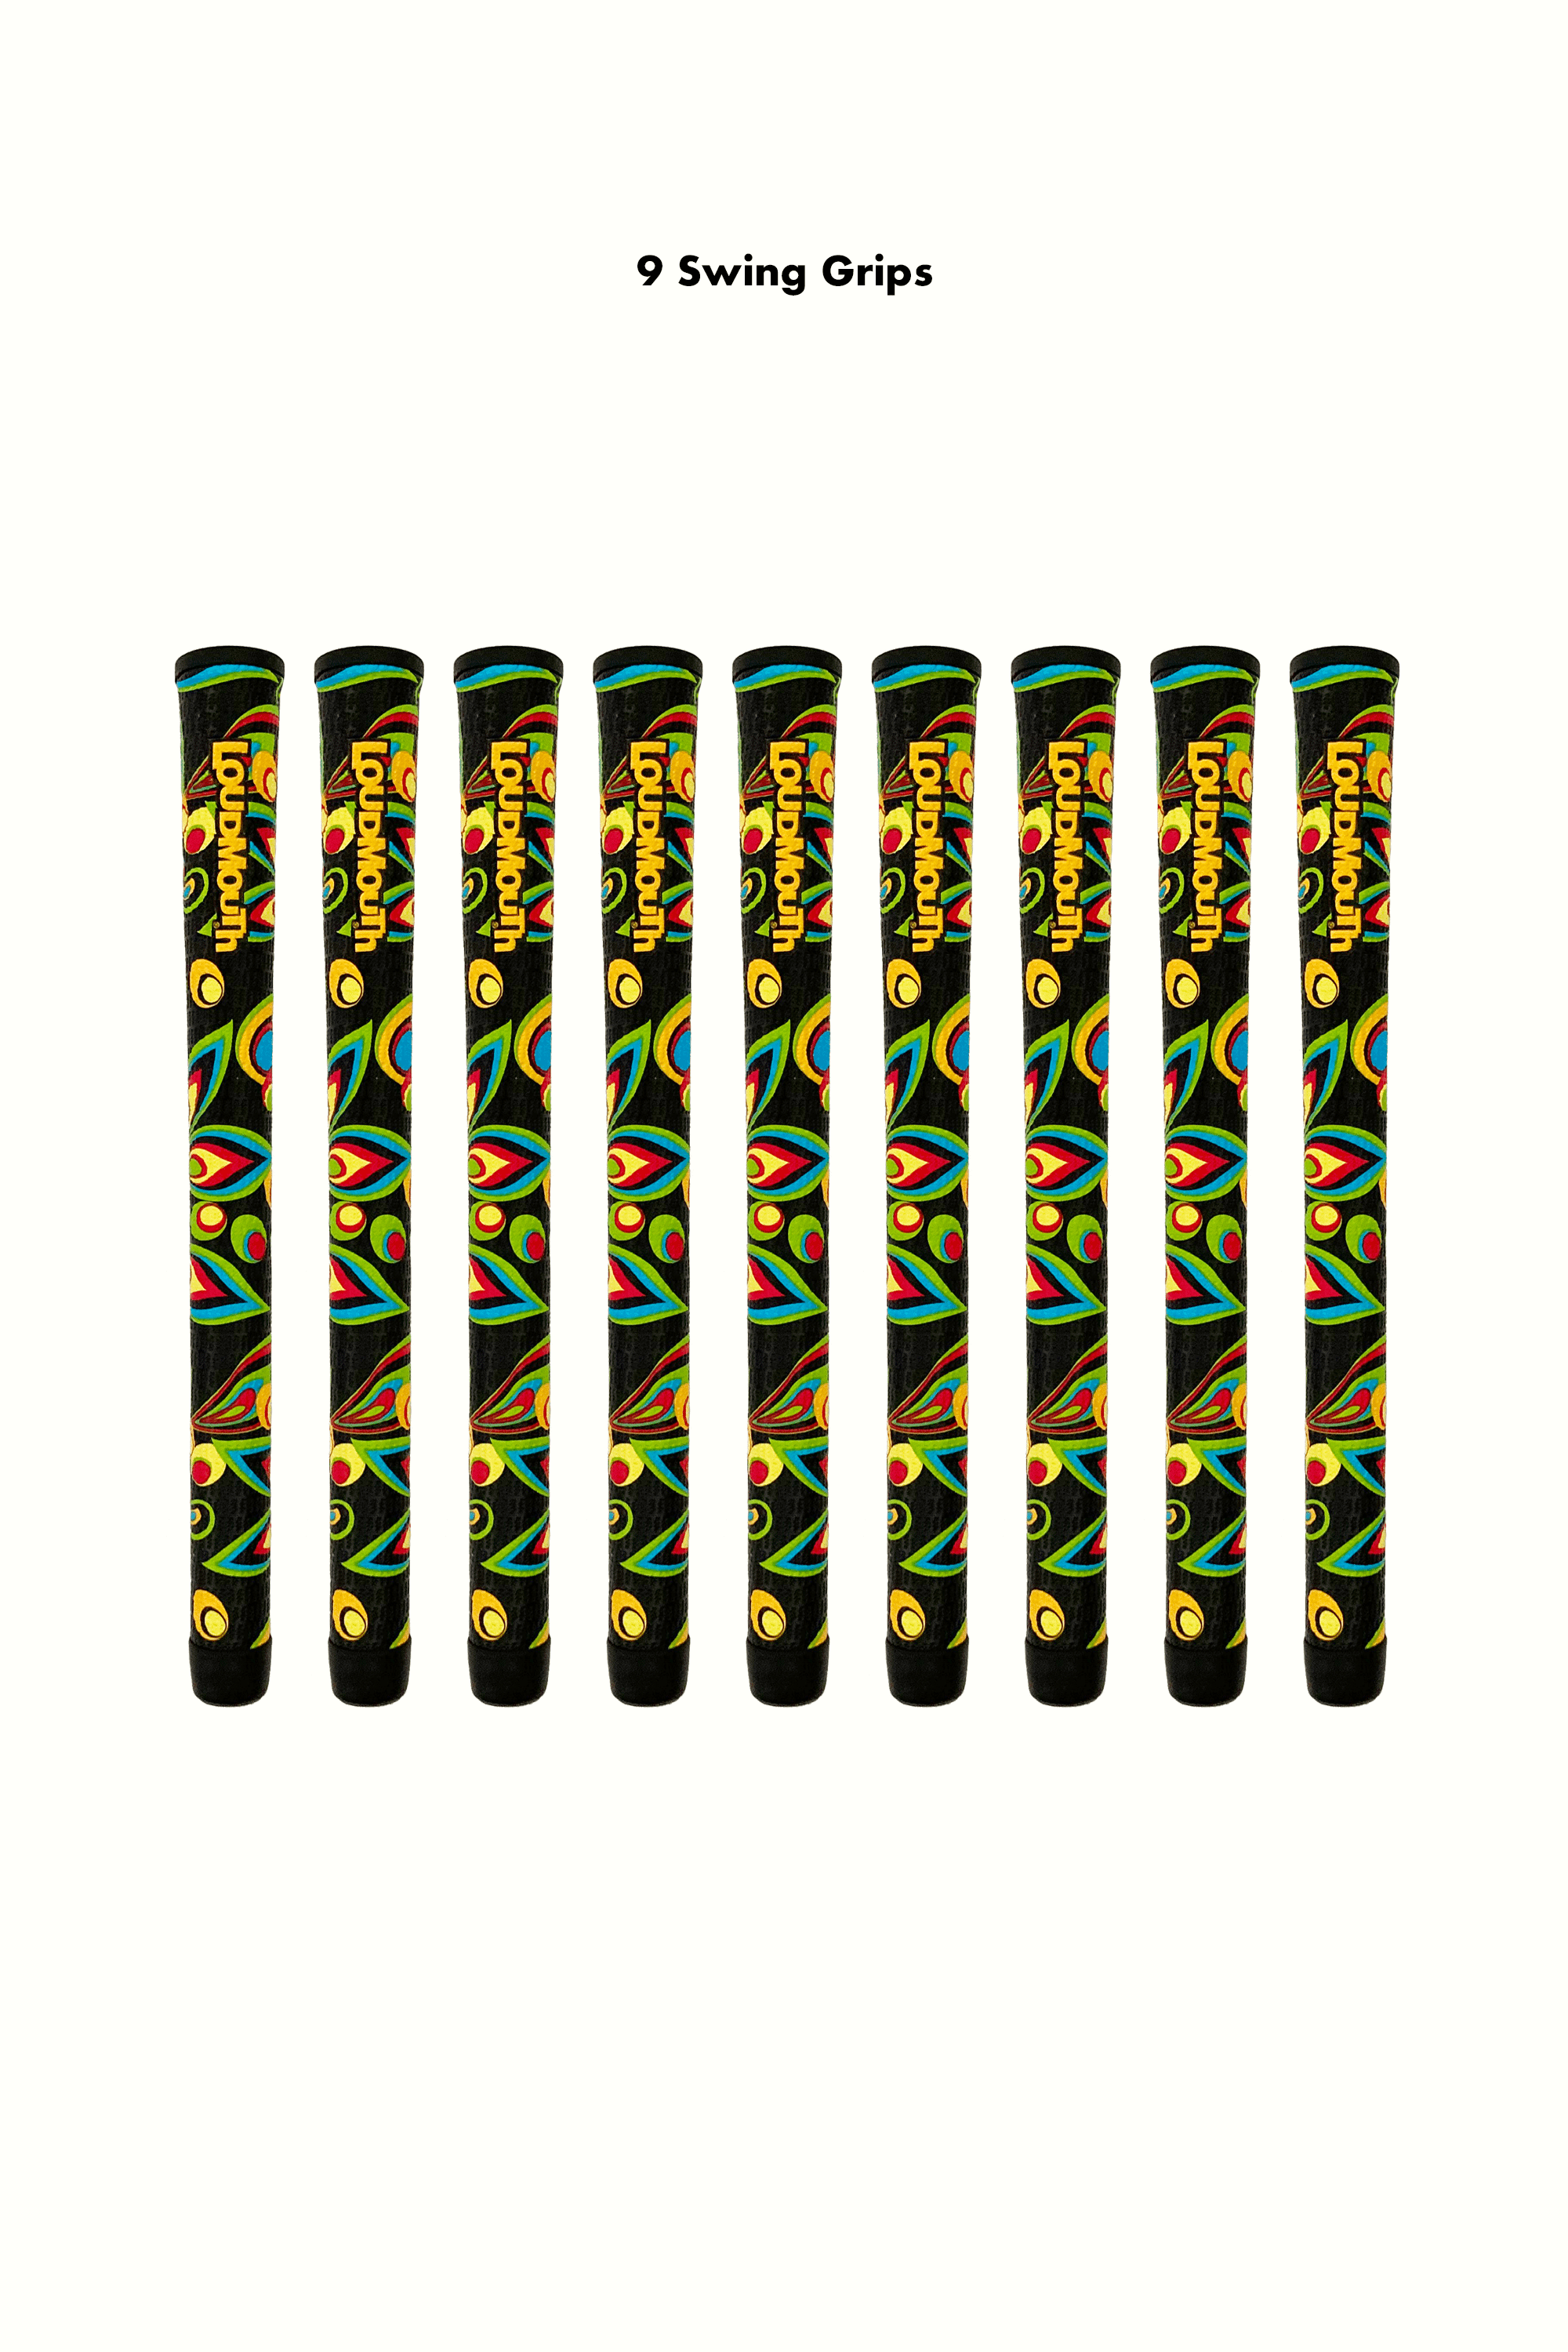 Nine swing grips with the Loudmouth logo and shagadelic print